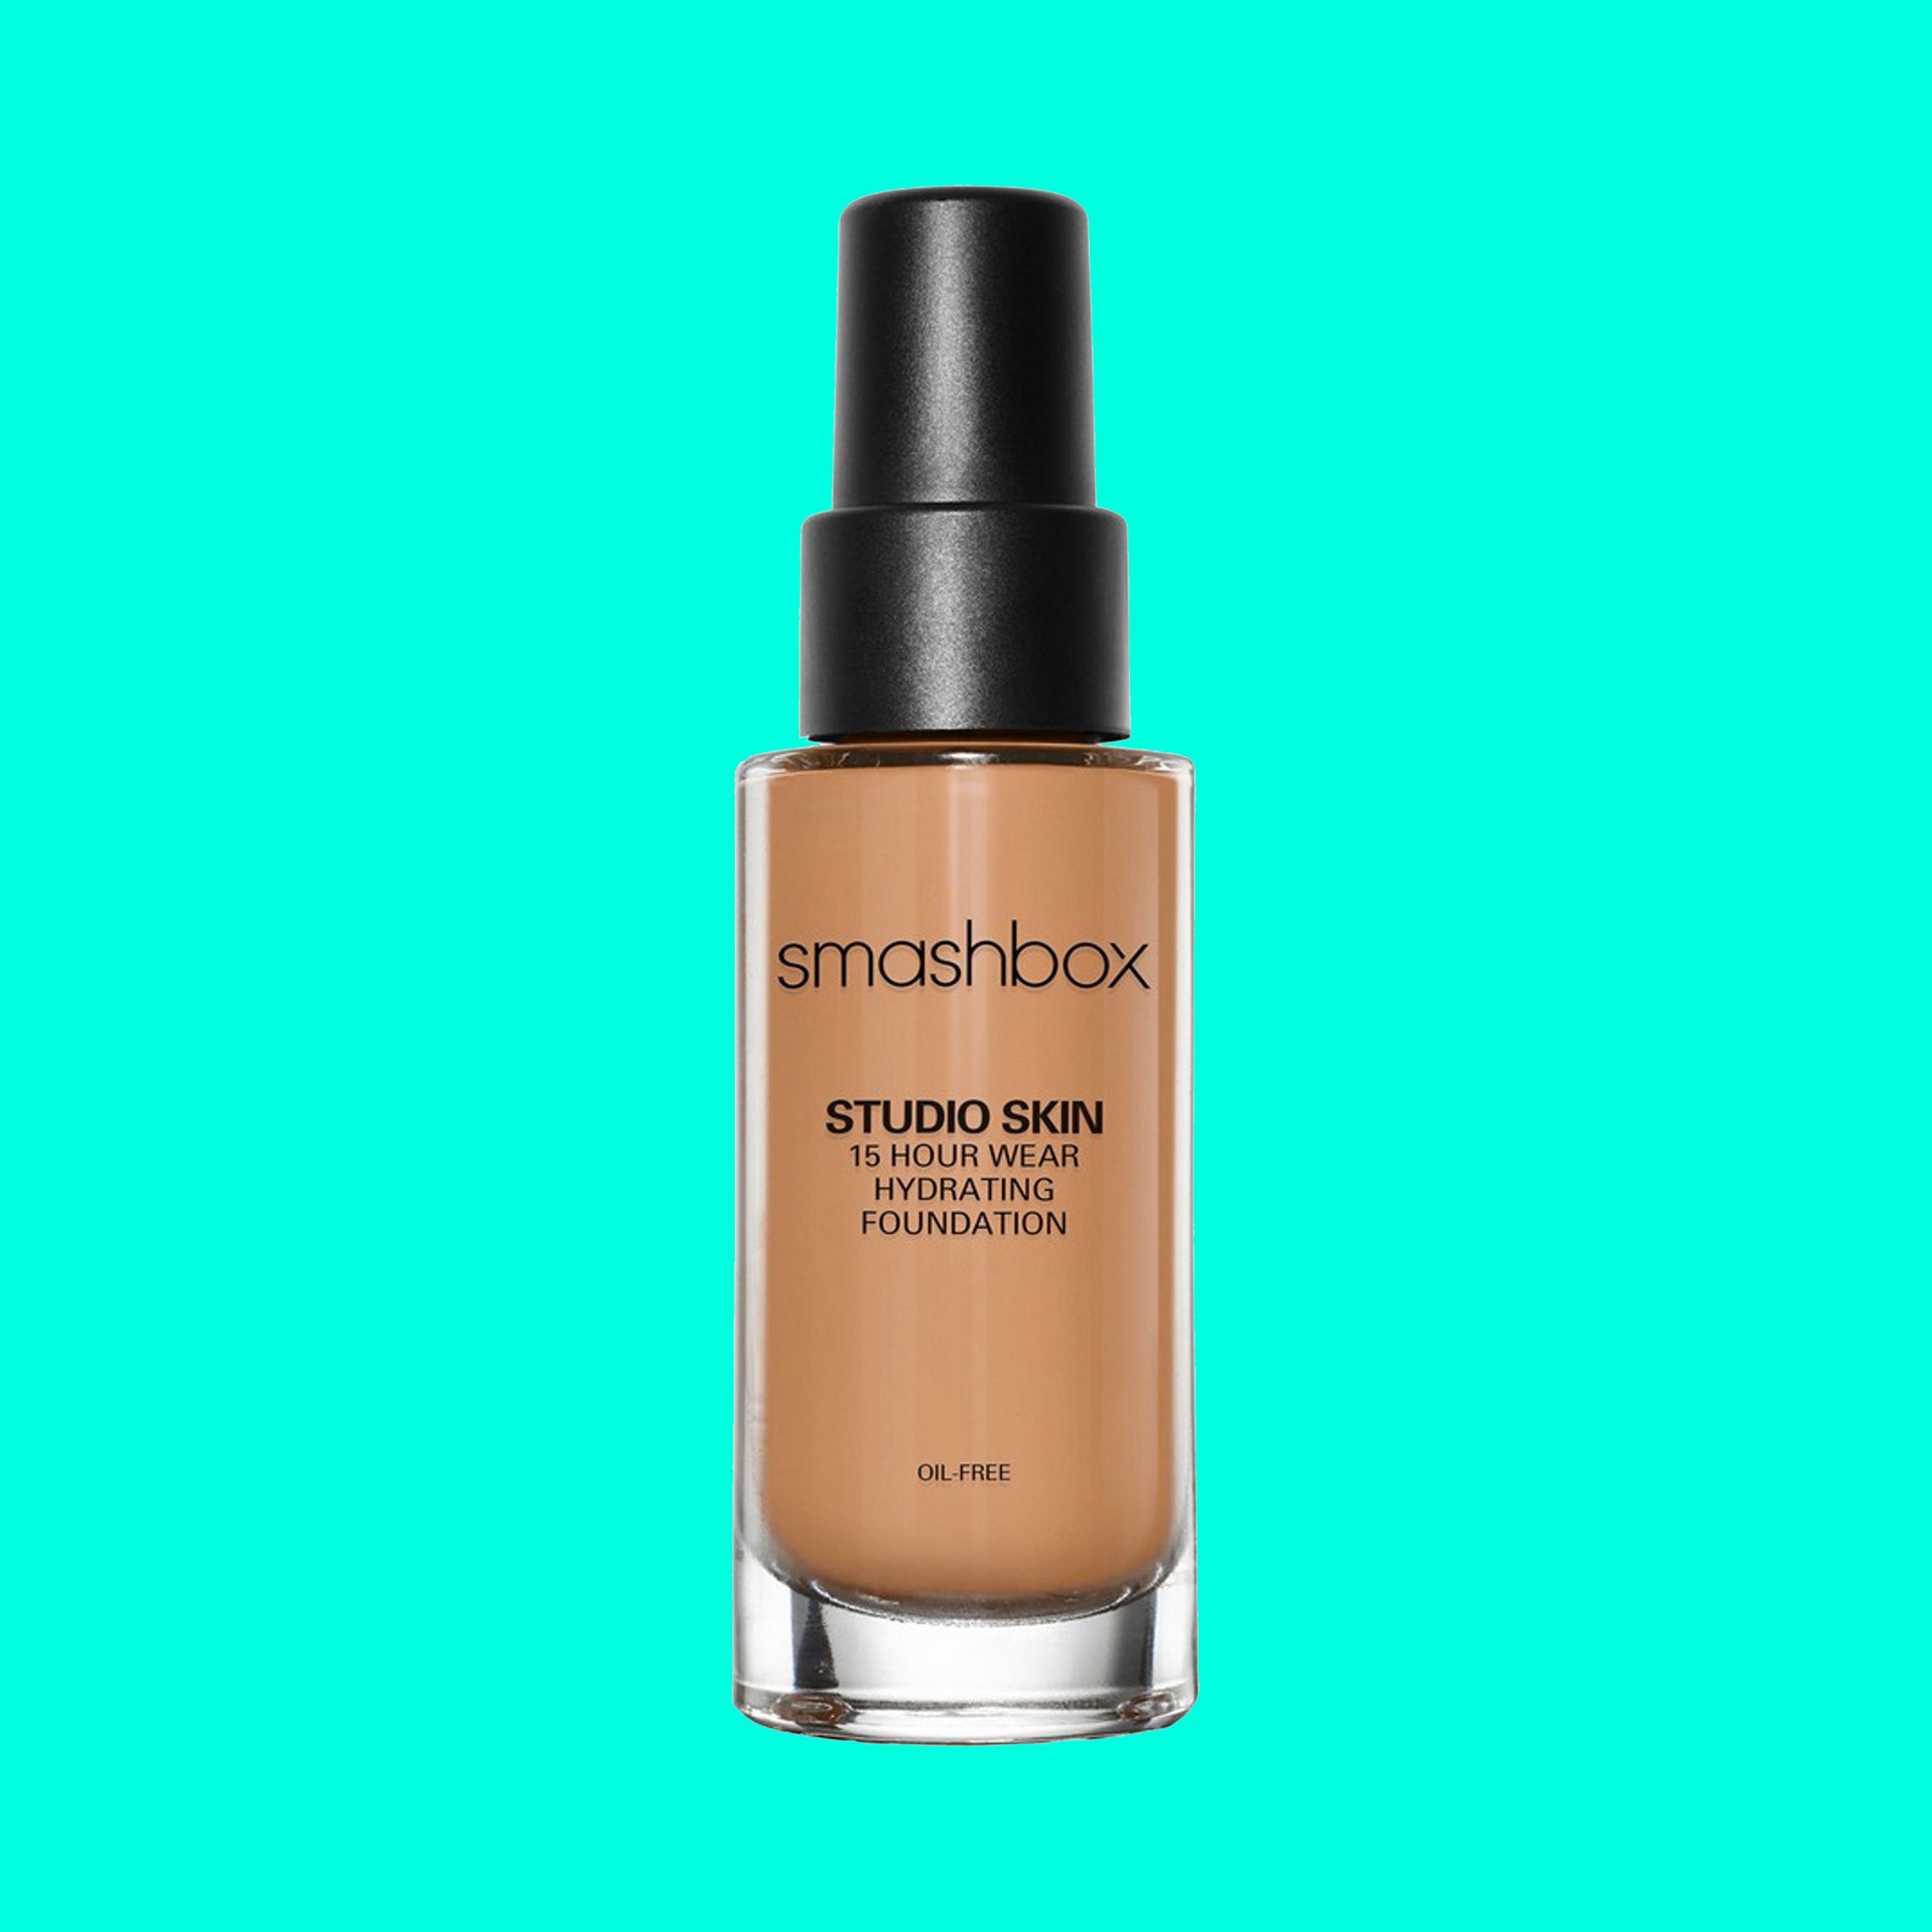 7 Under $50 Foundations That Cover Dark Spots Like A Boss
